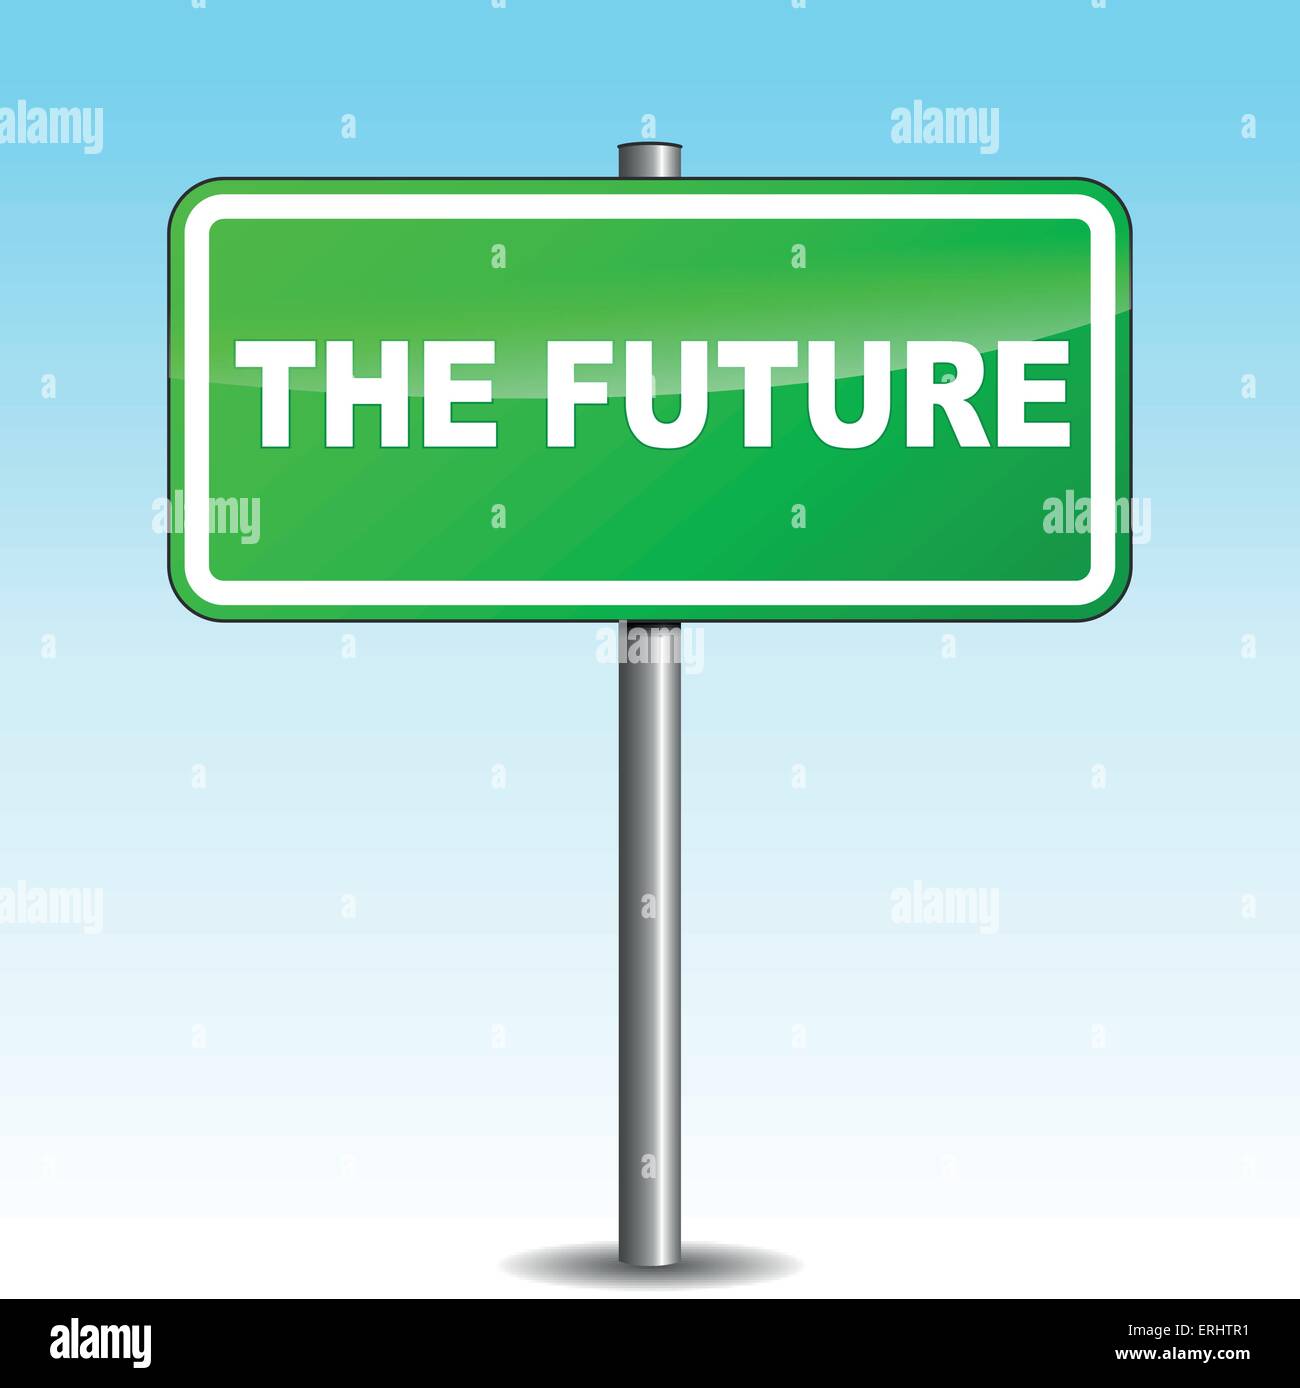 Vector illustration of future green signpost on sky background Stock Vector